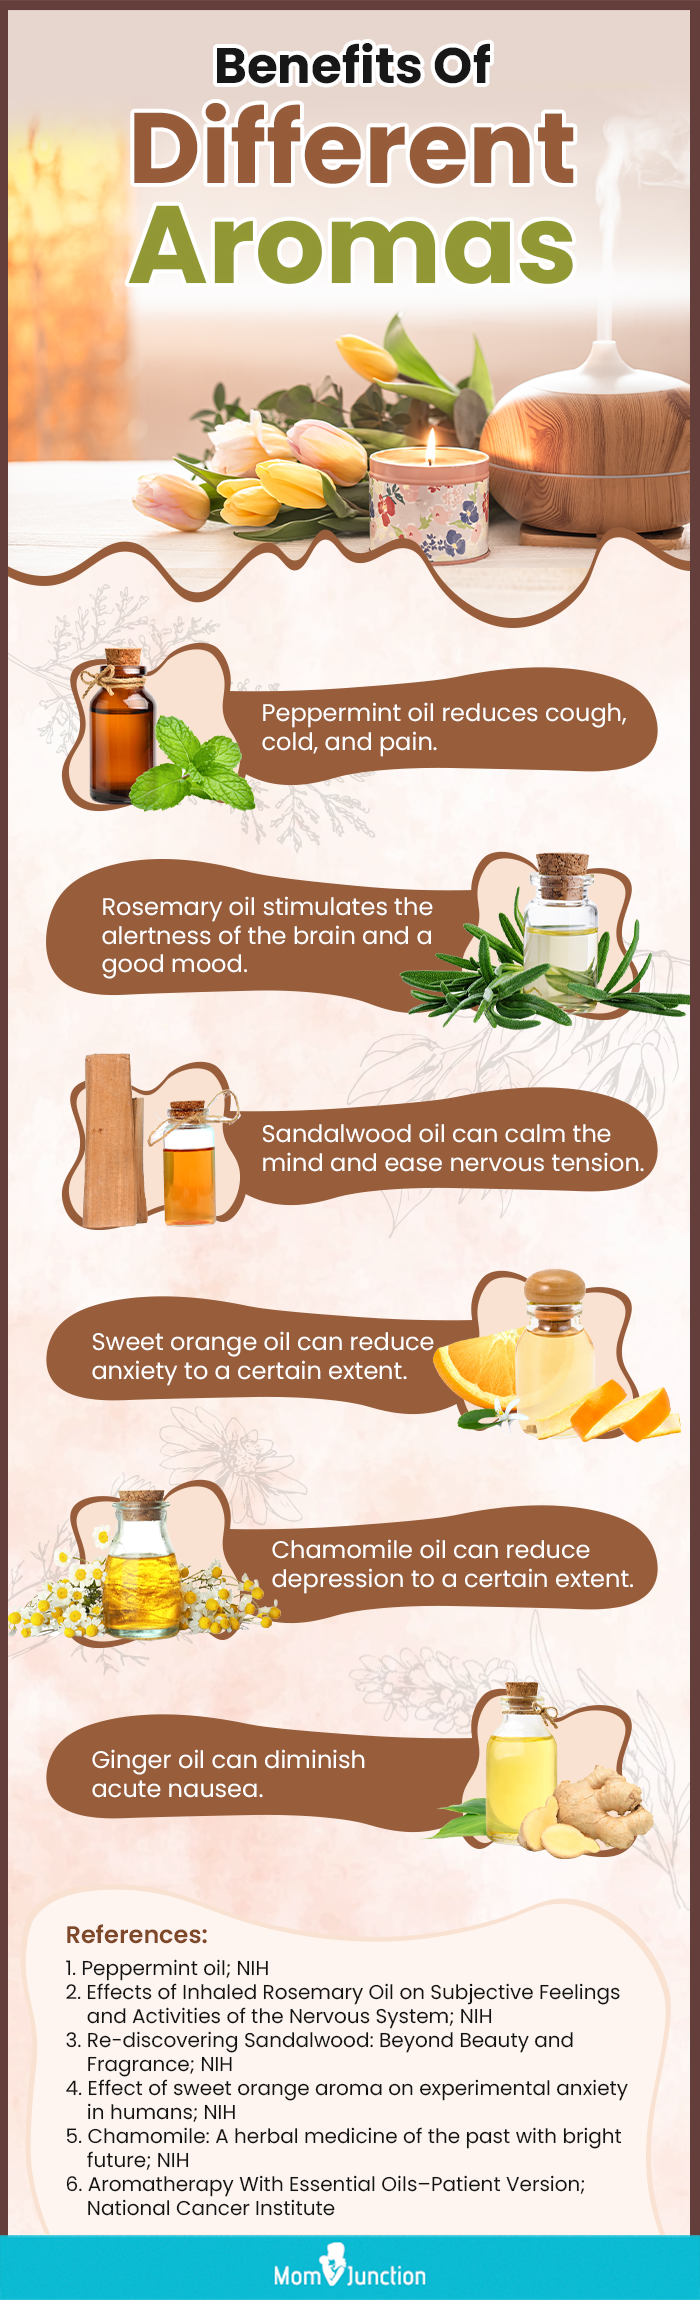 Benefits Of Different Aromas (Infographic)